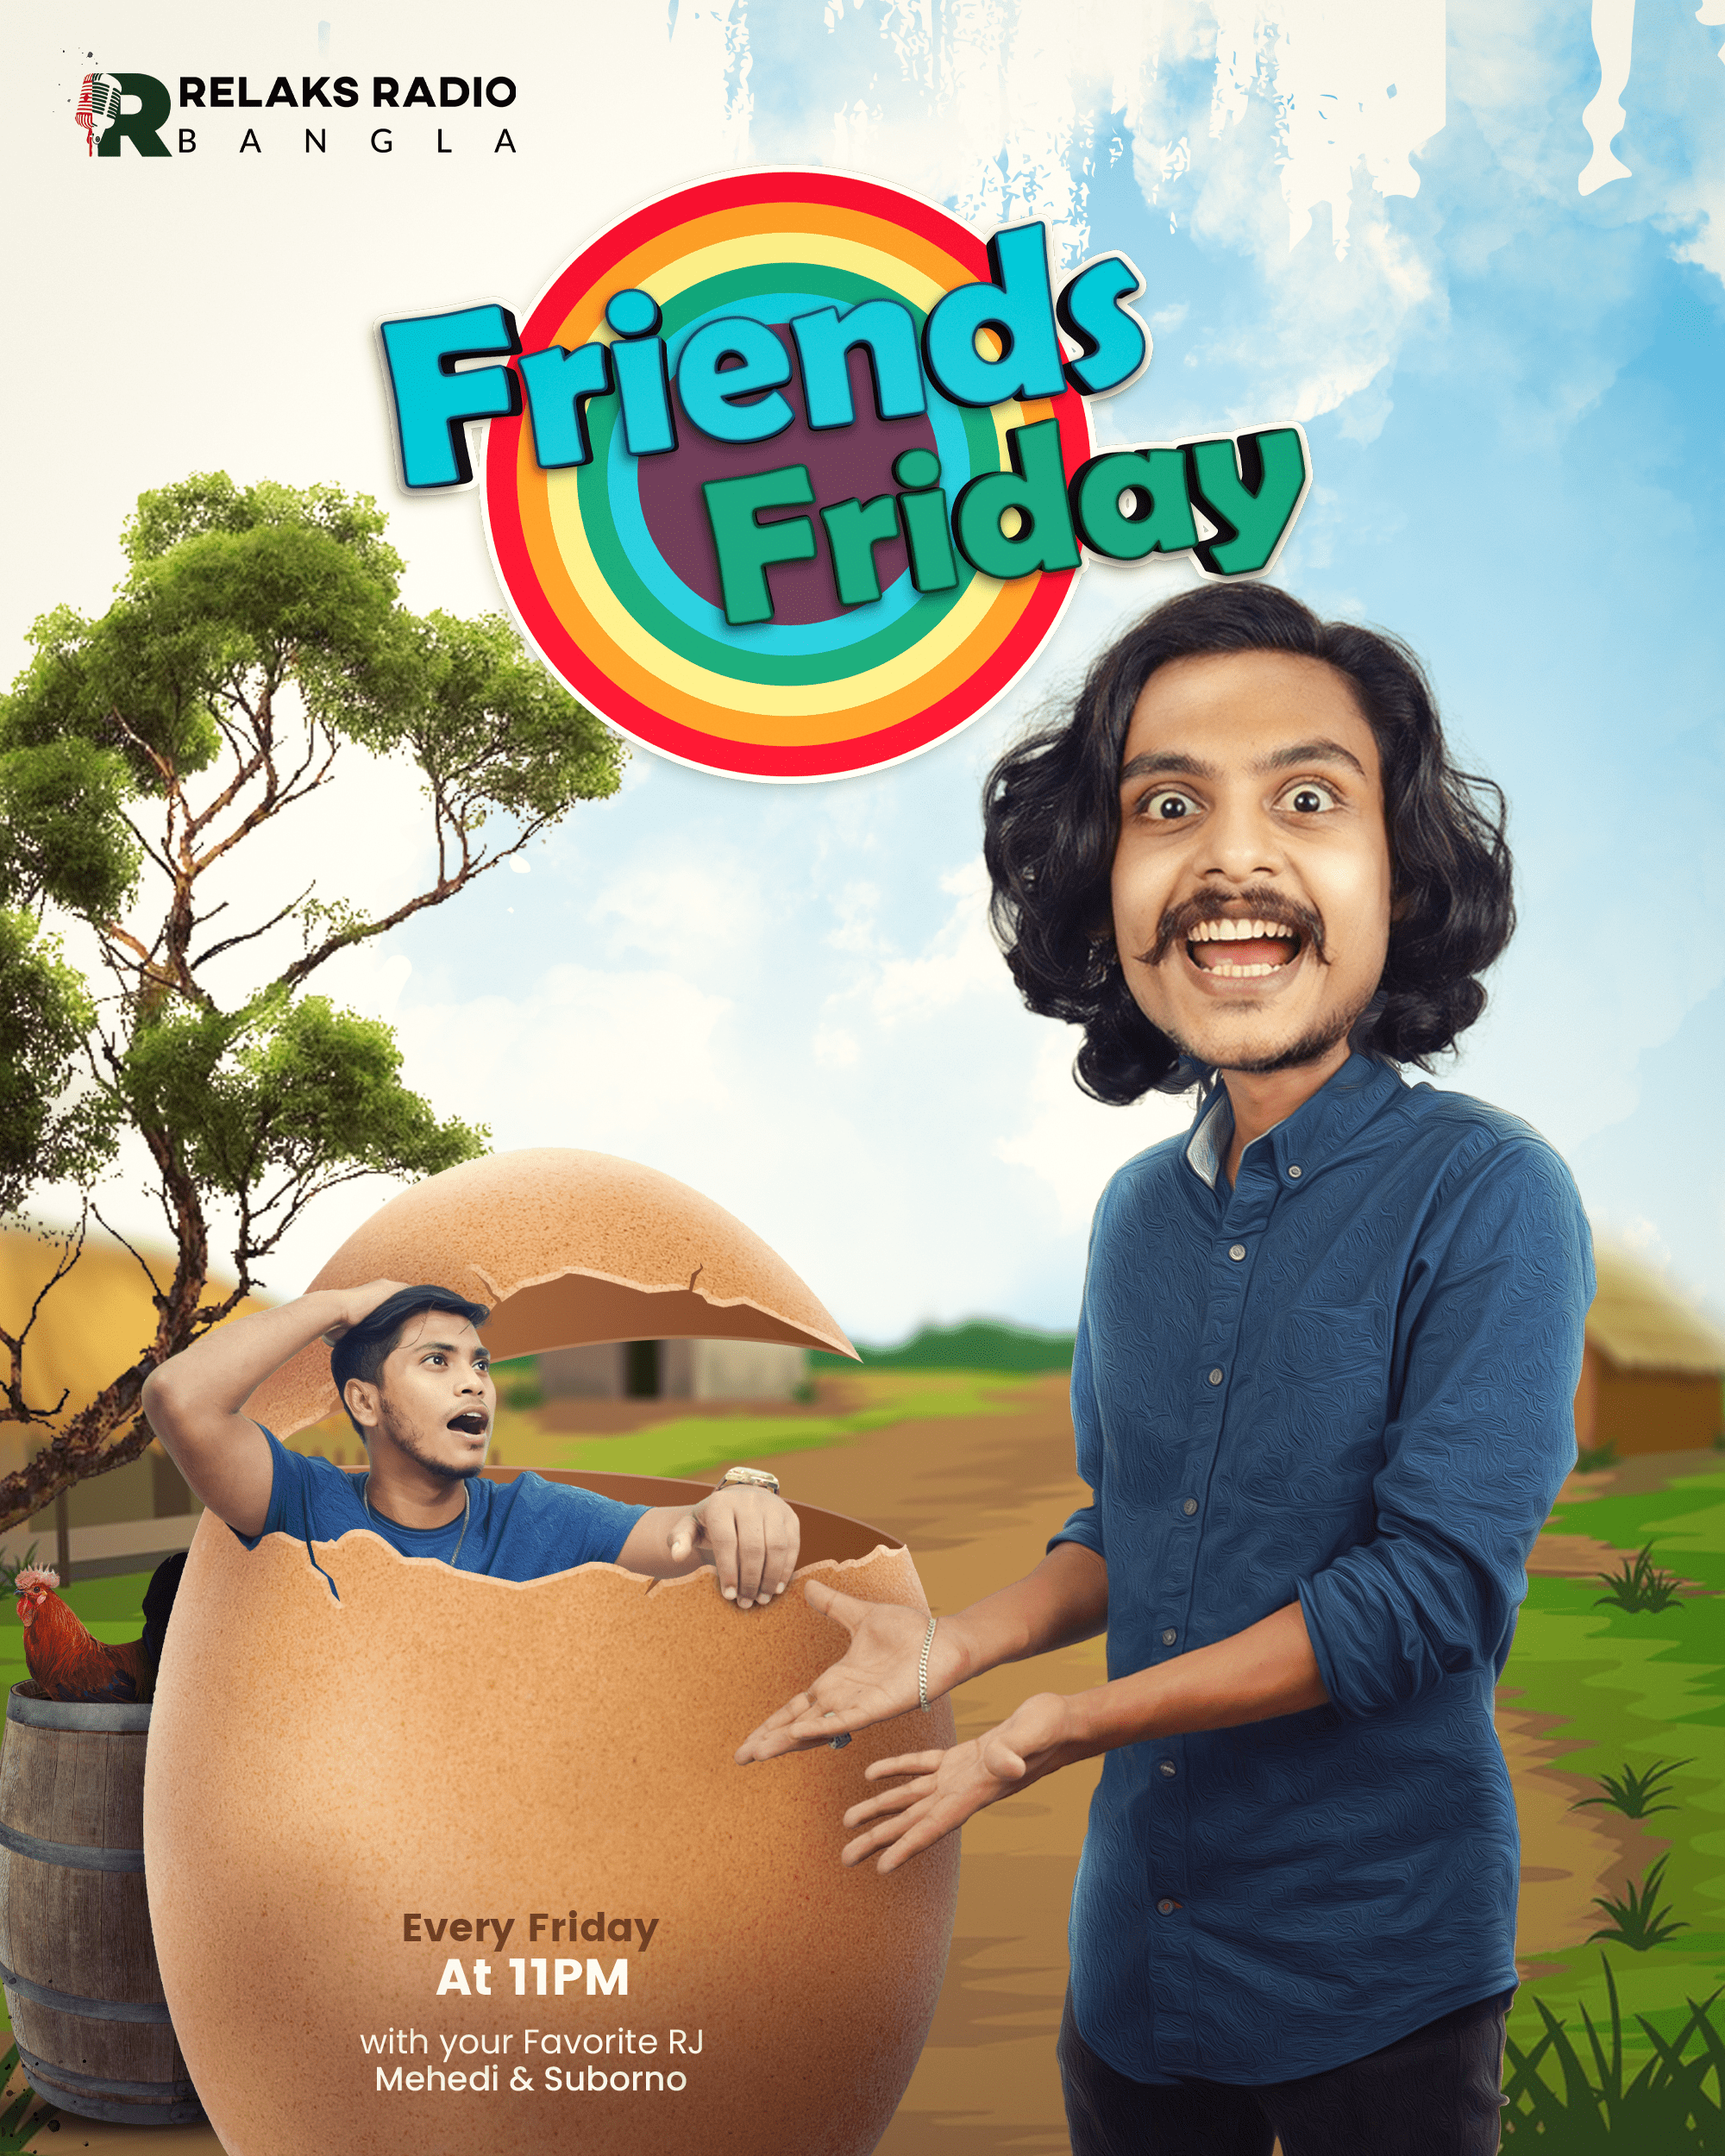 Friends-Friday-mobile